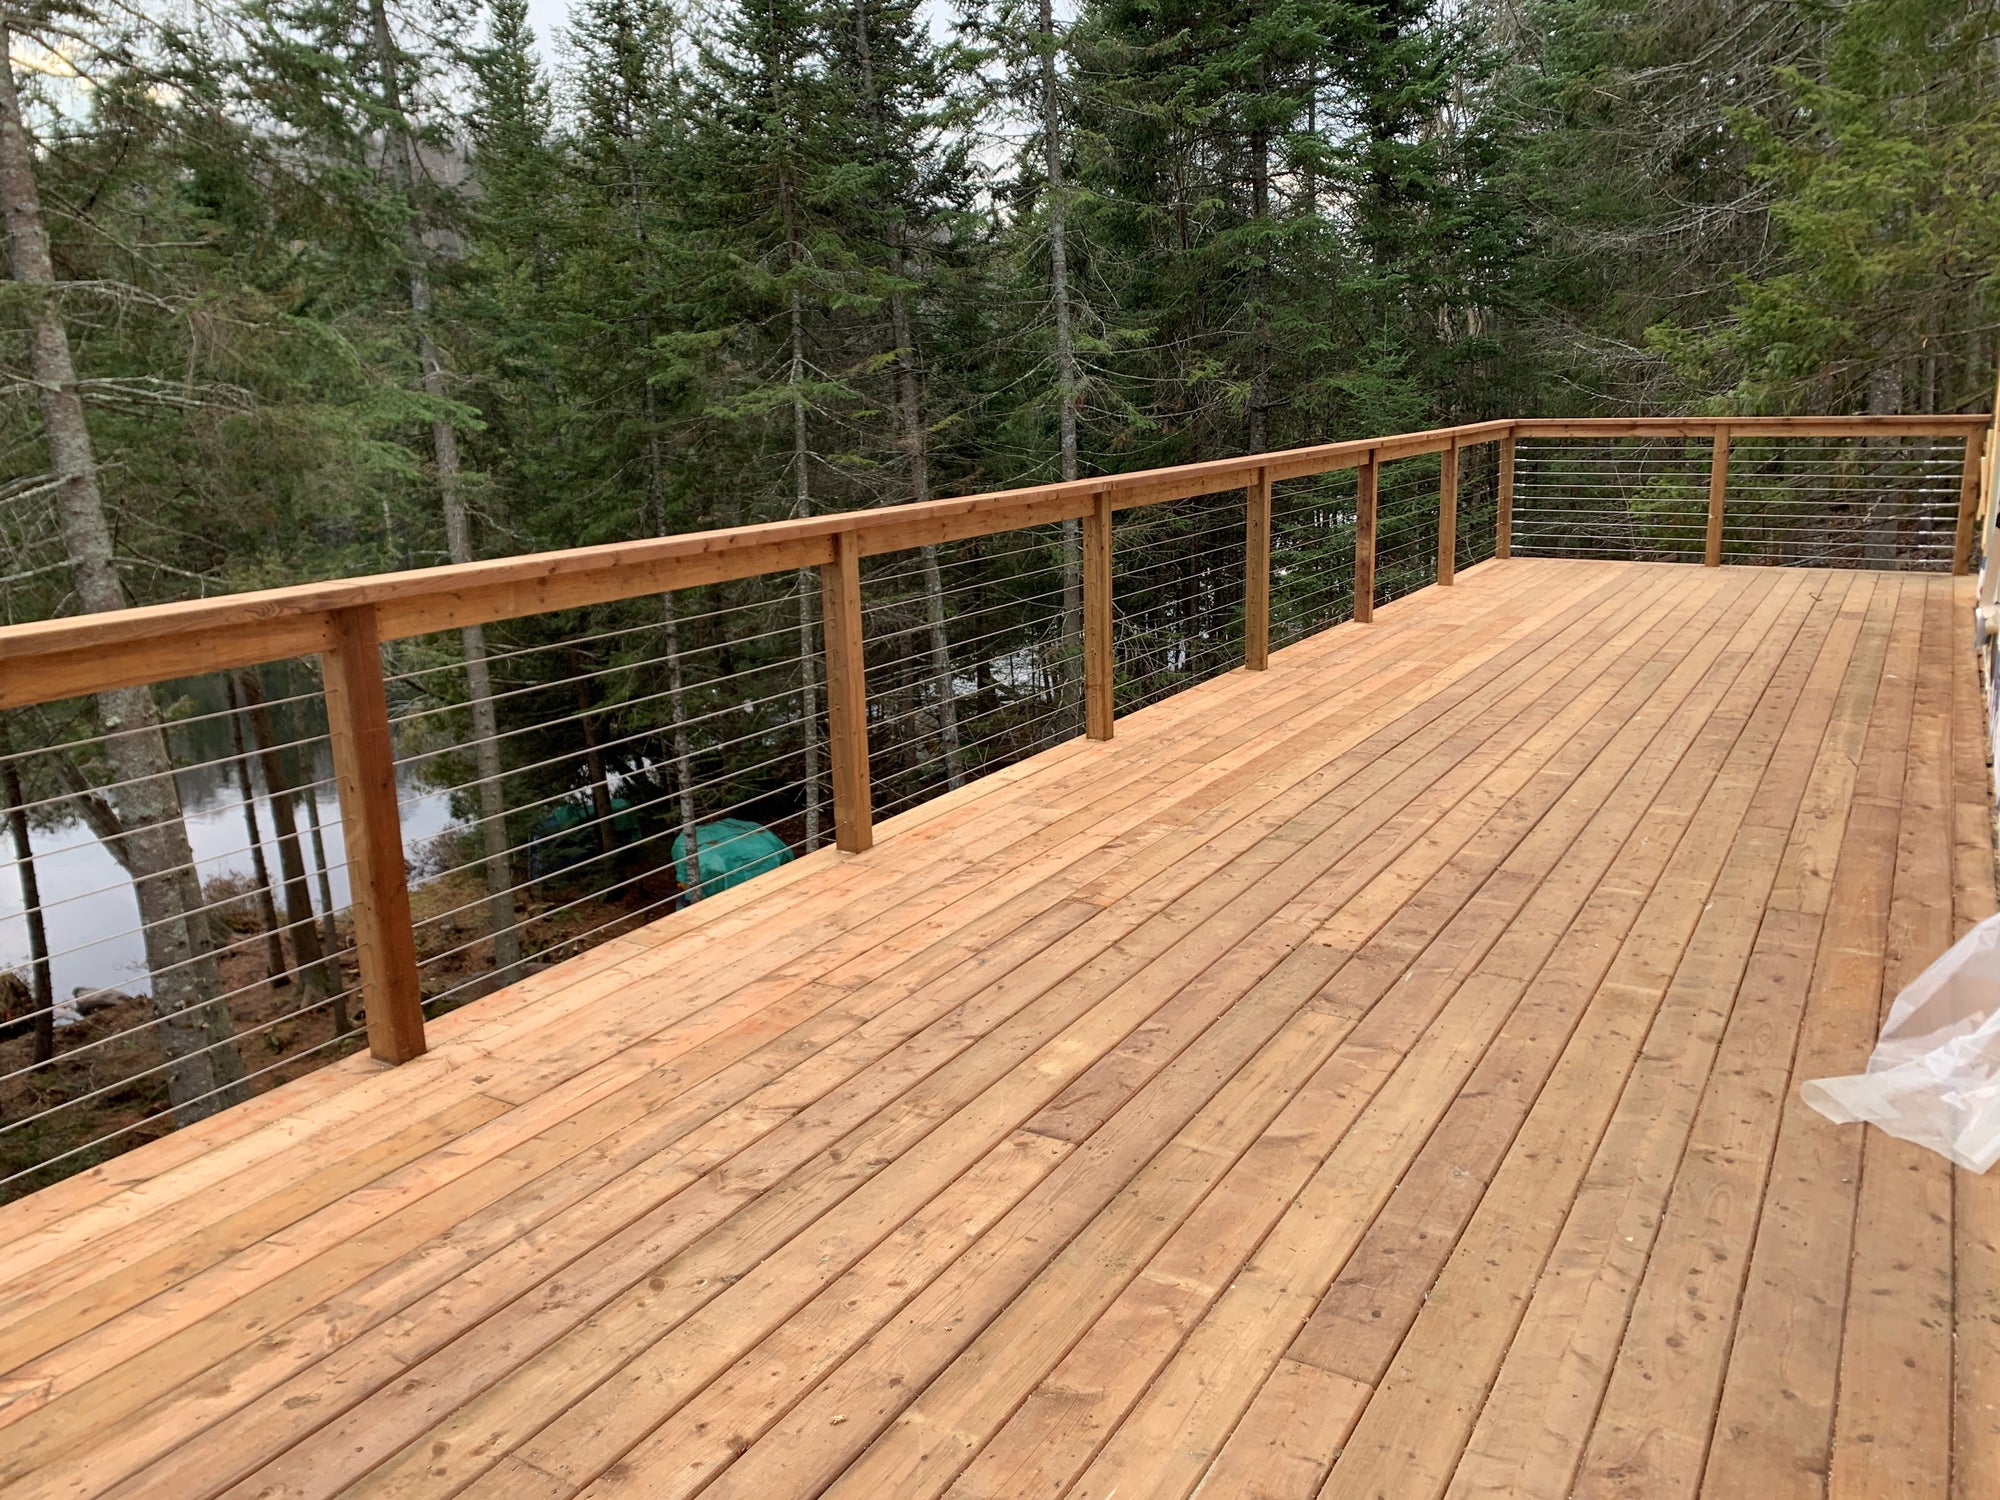 Cable Railing With Timber Post - Gauthier De LaPlante